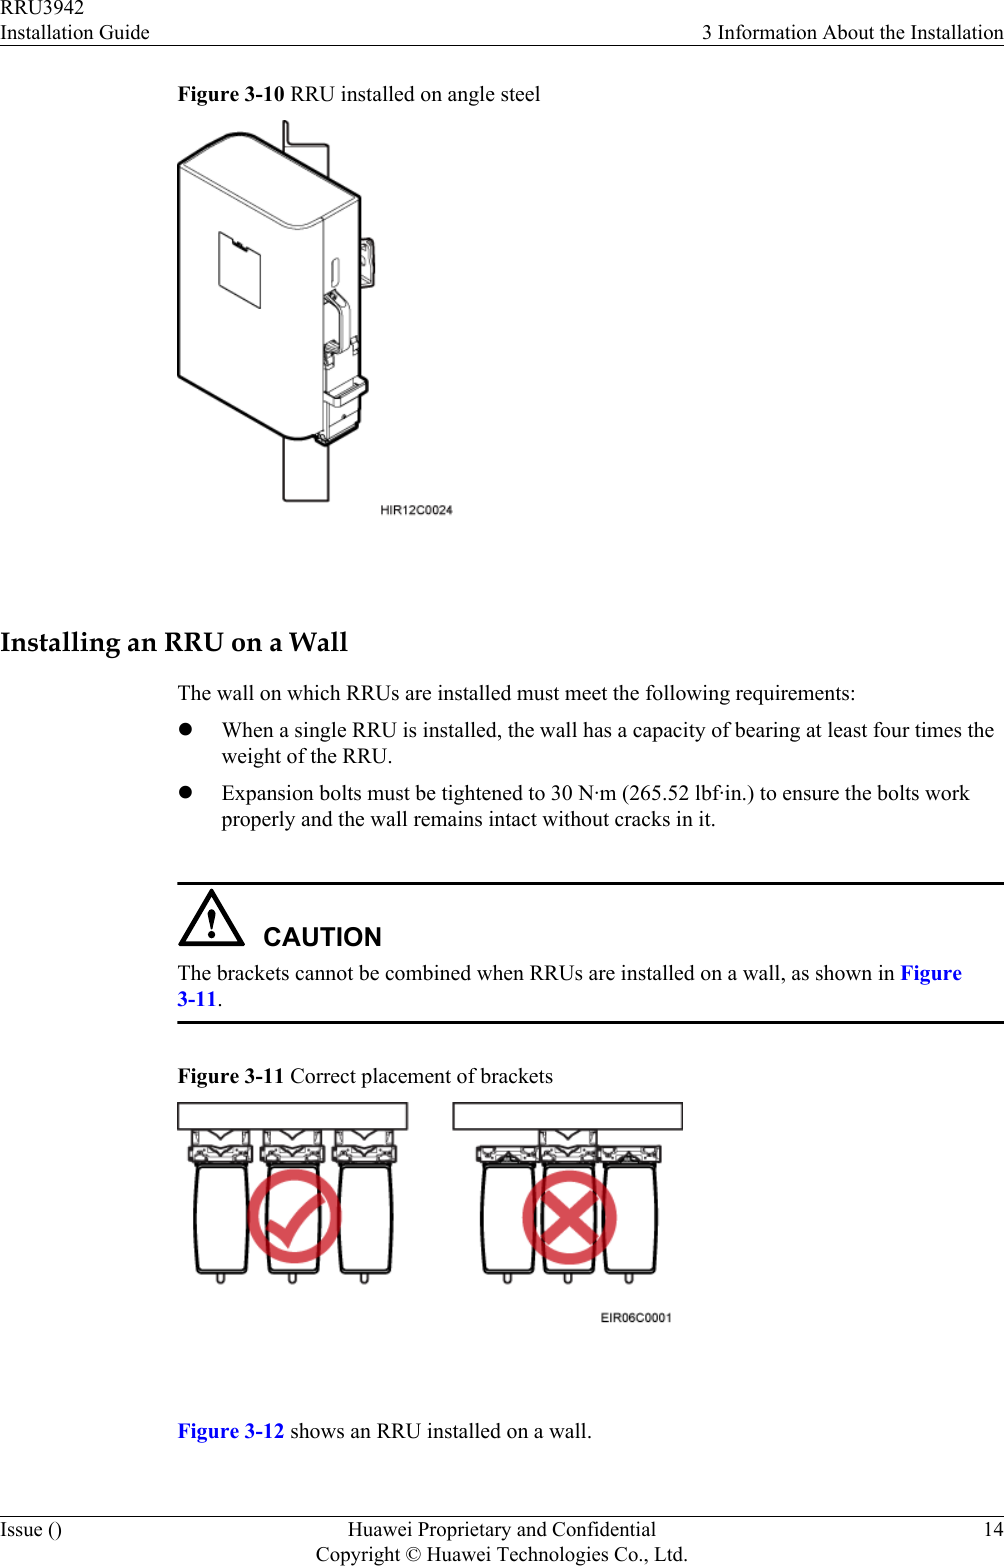 Figure 3-10 RRU installed on angle steel Installing an RRU on a WallThe wall on which RRUs are installed must meet the following requirements:lWhen a single RRU is installed, the wall has a capacity of bearing at least four times theweight of the RRU.lExpansion bolts must be tightened to 30 N·m (265.52 lbf·in.) to ensure the bolts workproperly and the wall remains intact without cracks in it.CAUTIONThe brackets cannot be combined when RRUs are installed on a wall, as shown in Figure3-11.Figure 3-11 Correct placement of brackets Figure 3-12 shows an RRU installed on a wall.RRU3942Installation Guide 3 Information About the InstallationIssue () Huawei Proprietary and ConfidentialCopyright © Huawei Technologies Co., Ltd.14